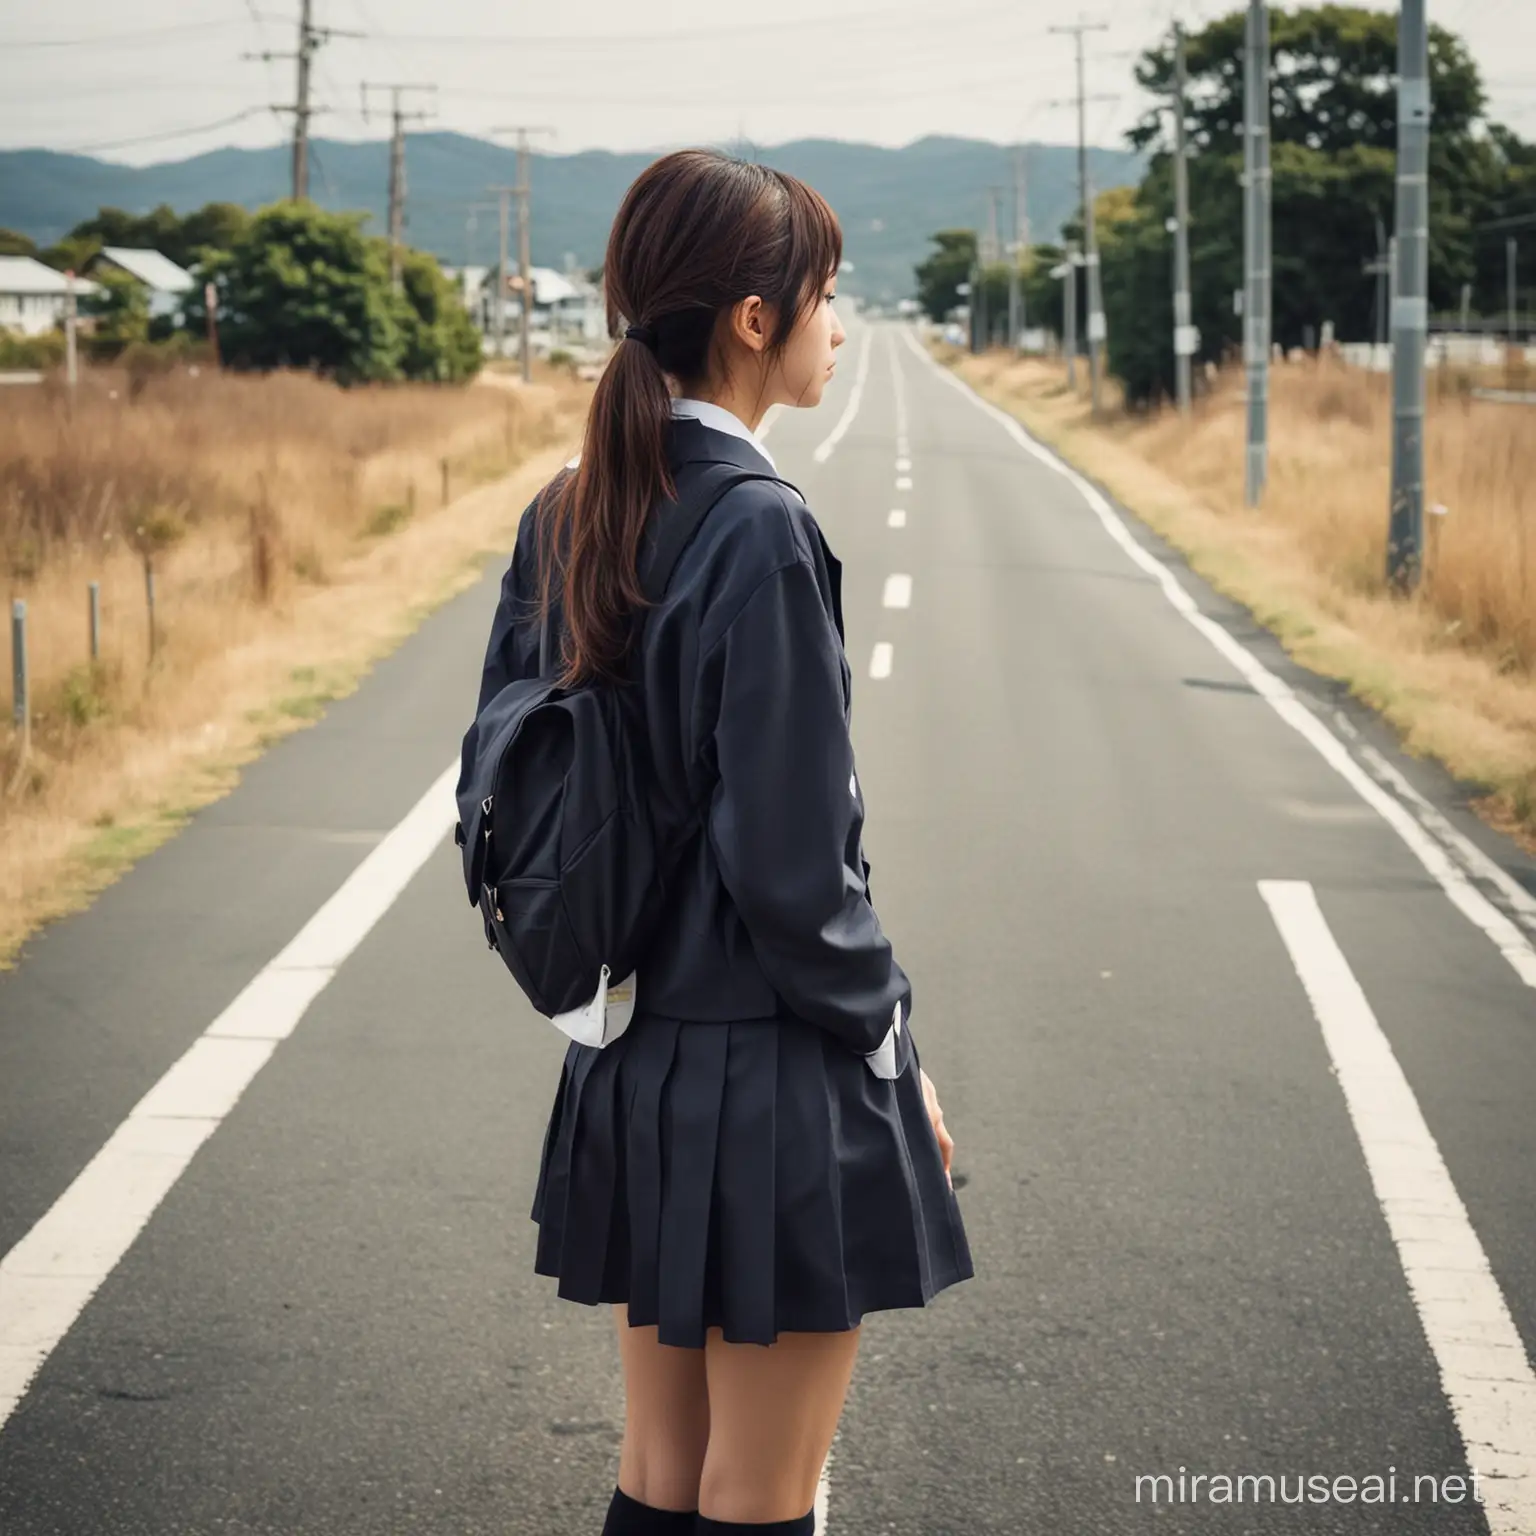 Contemplative High School Girl in Japanese Student Uniform Facing Away from Road